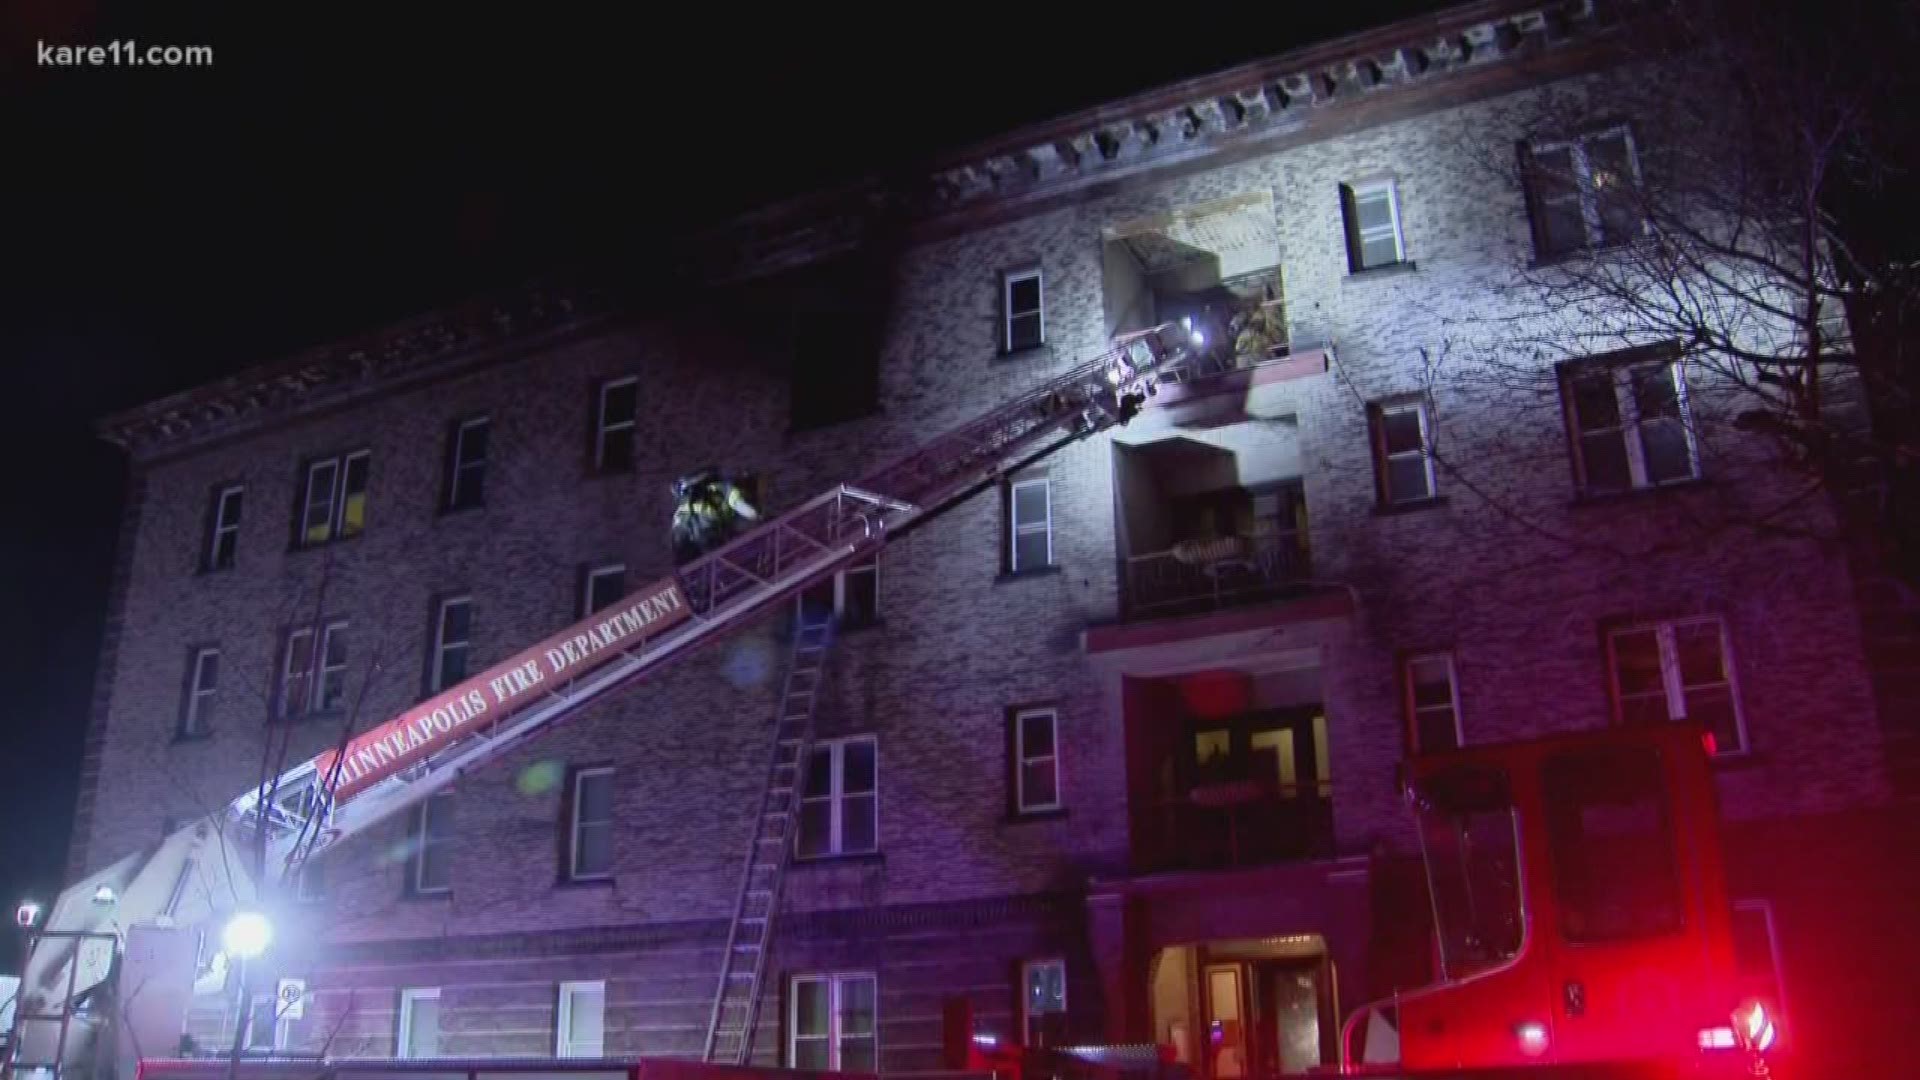 Minneapolis Fire Department says they responded to a four-story apartment fire on the 300 block of 19th St E in Minneapolis Tuesday evening.